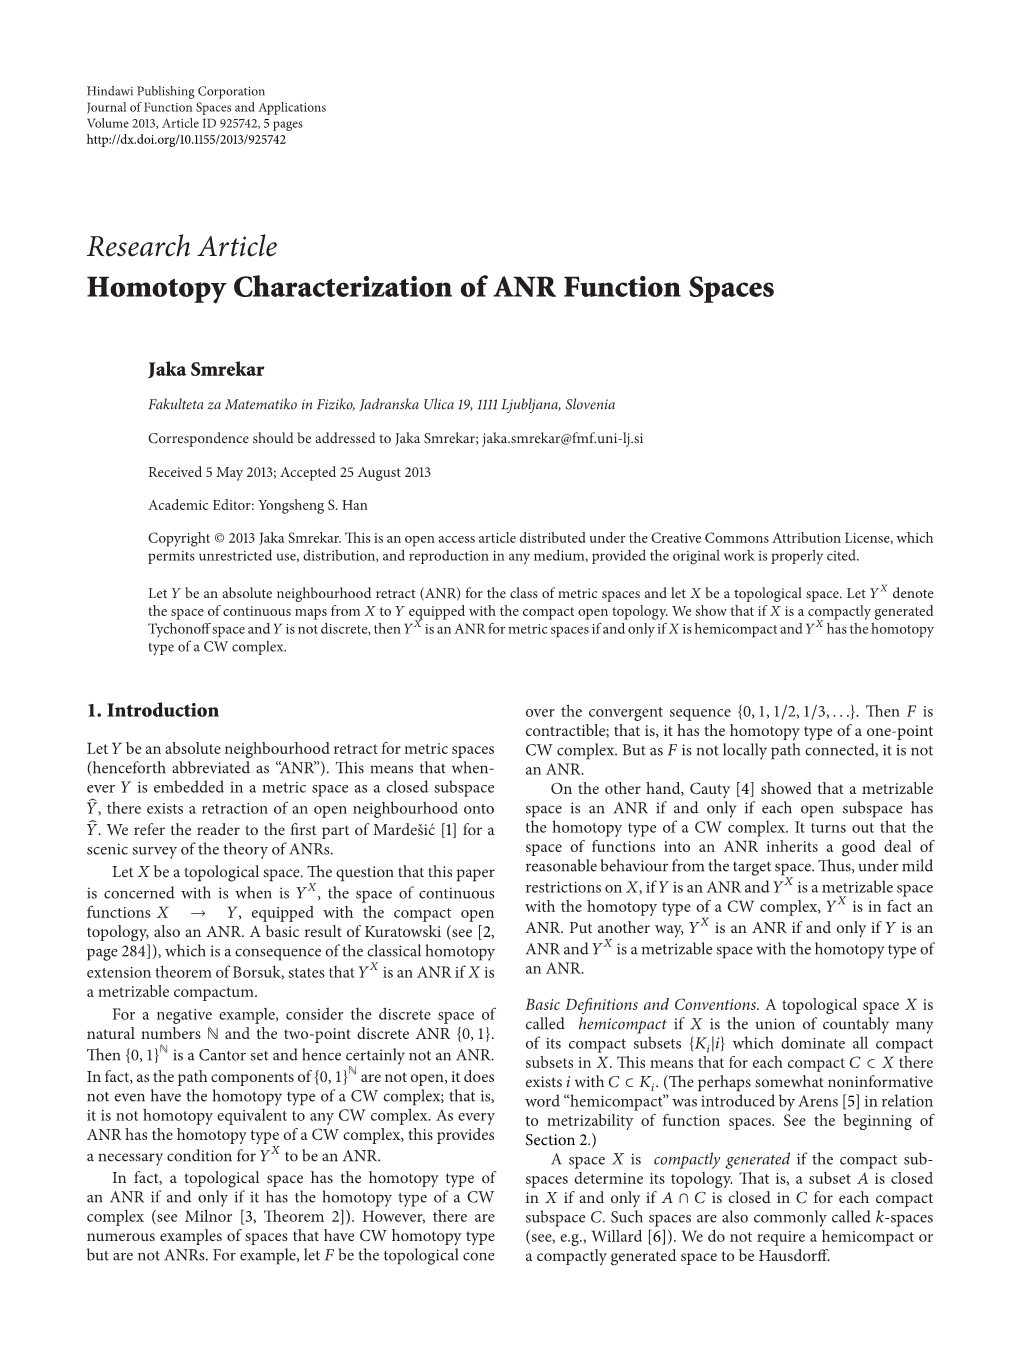 Research Article Homotopy Characterization of ANR Function Spaces